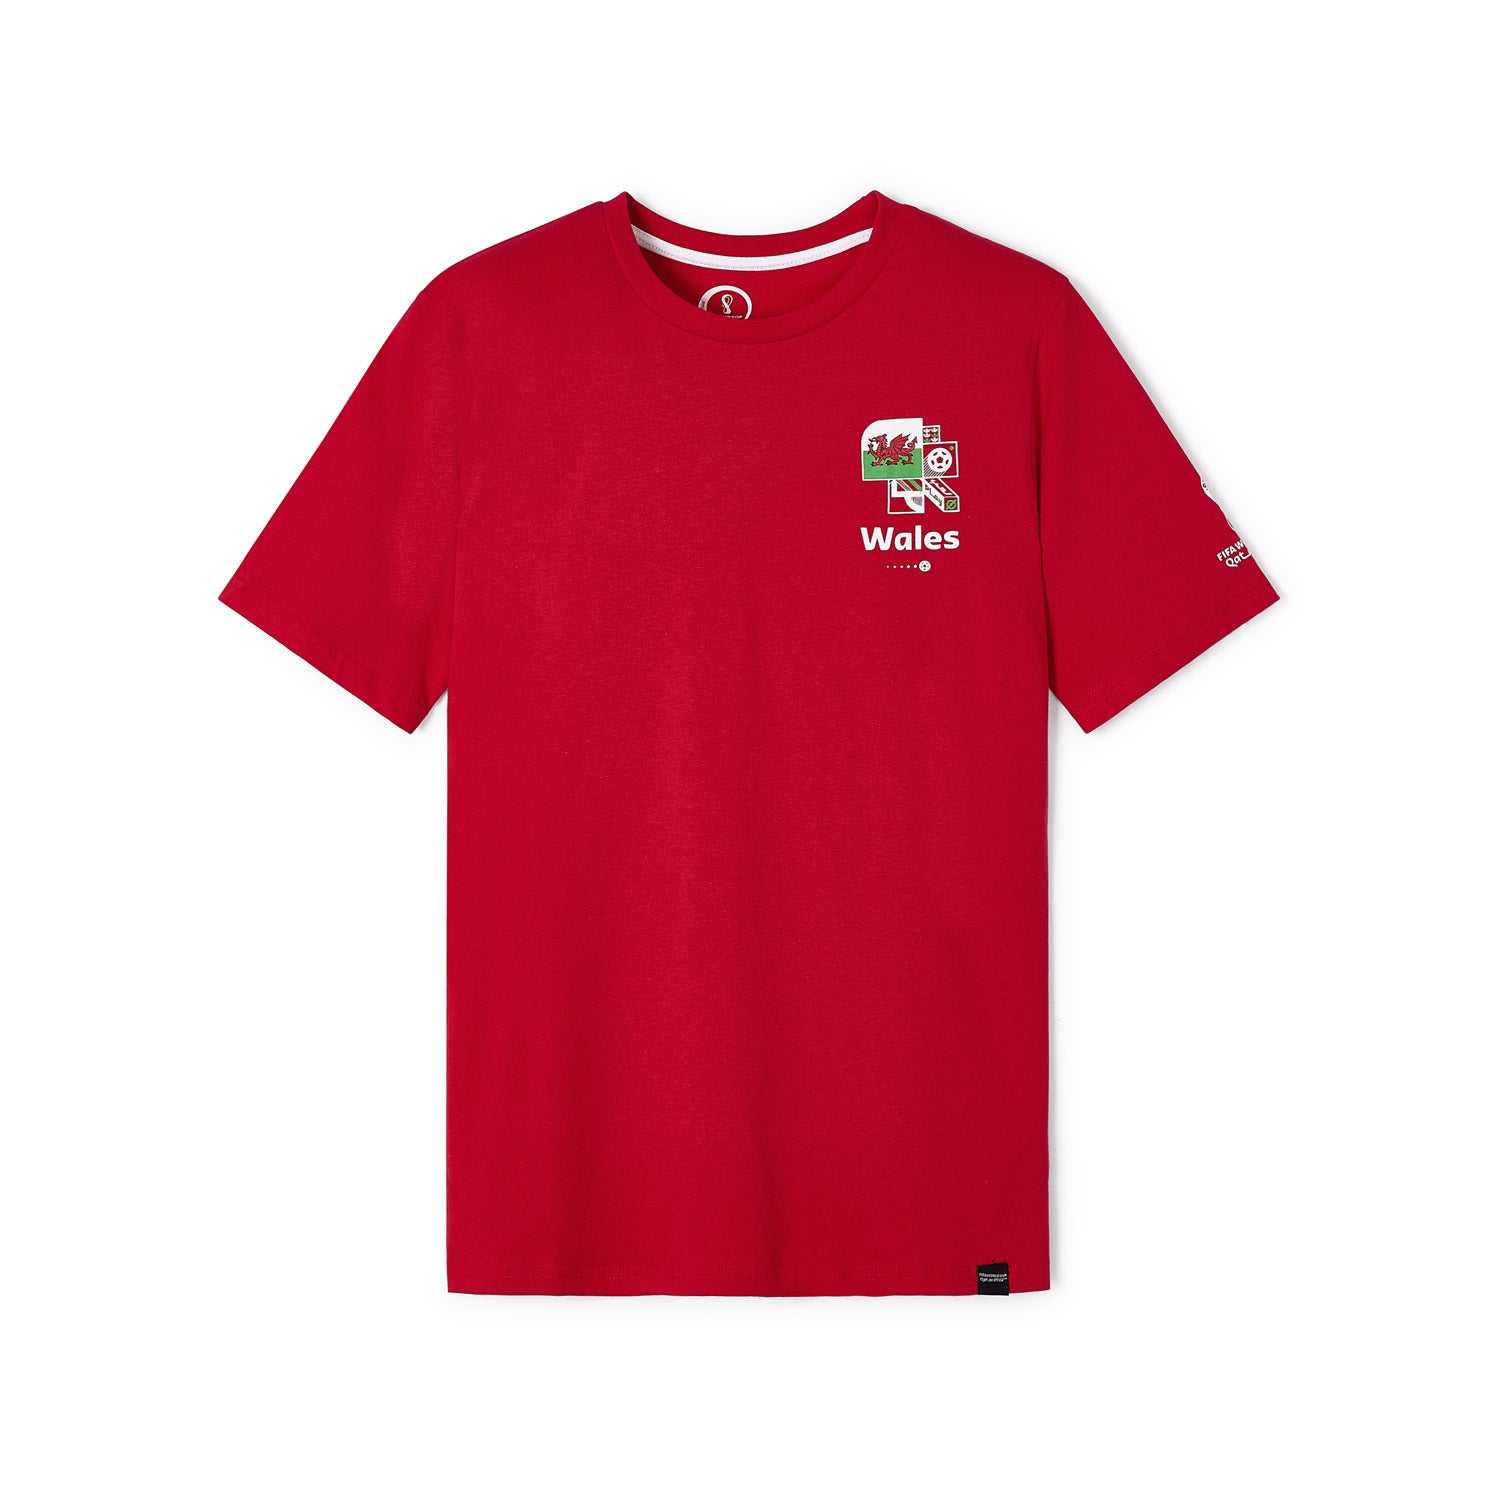 2022 World Cup Wales Red T-Shirt - Mens